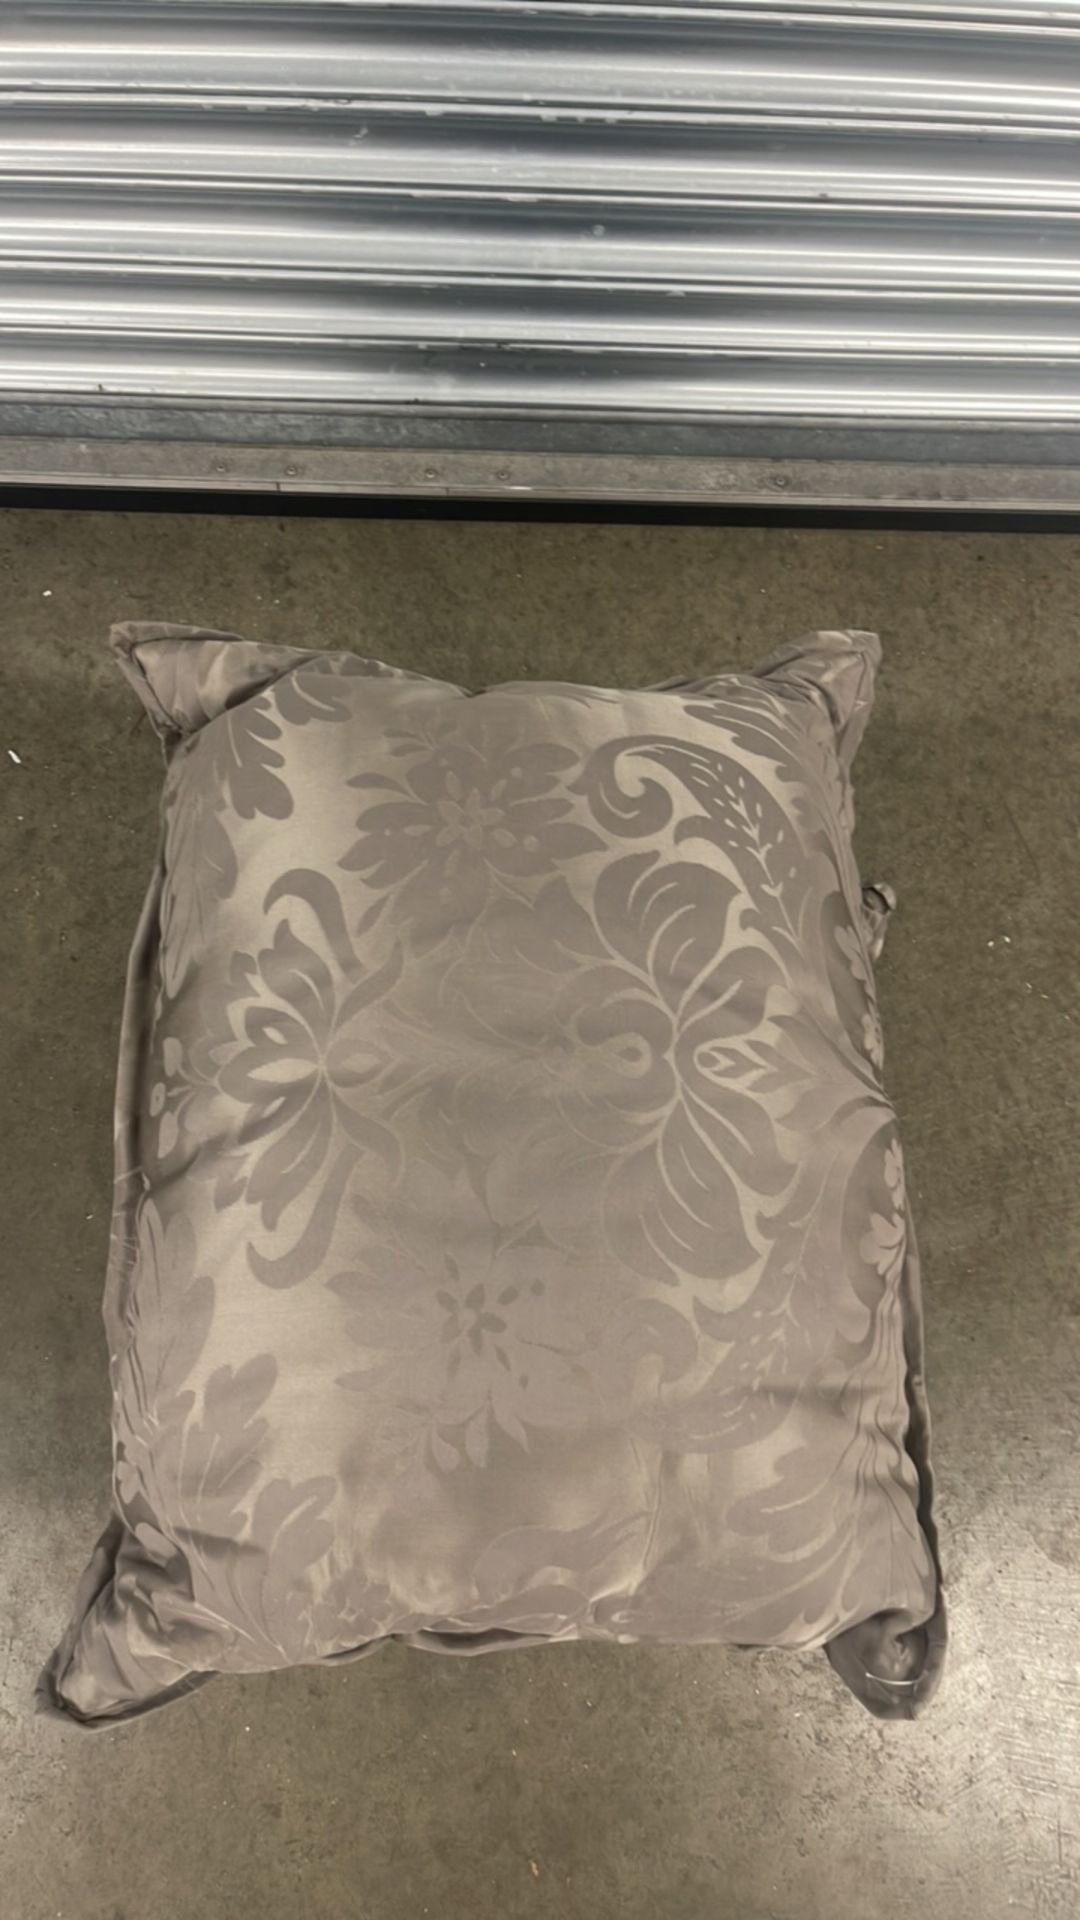 Grey Sofa Cushions with Floral Design x 3 - Image 3 of 4